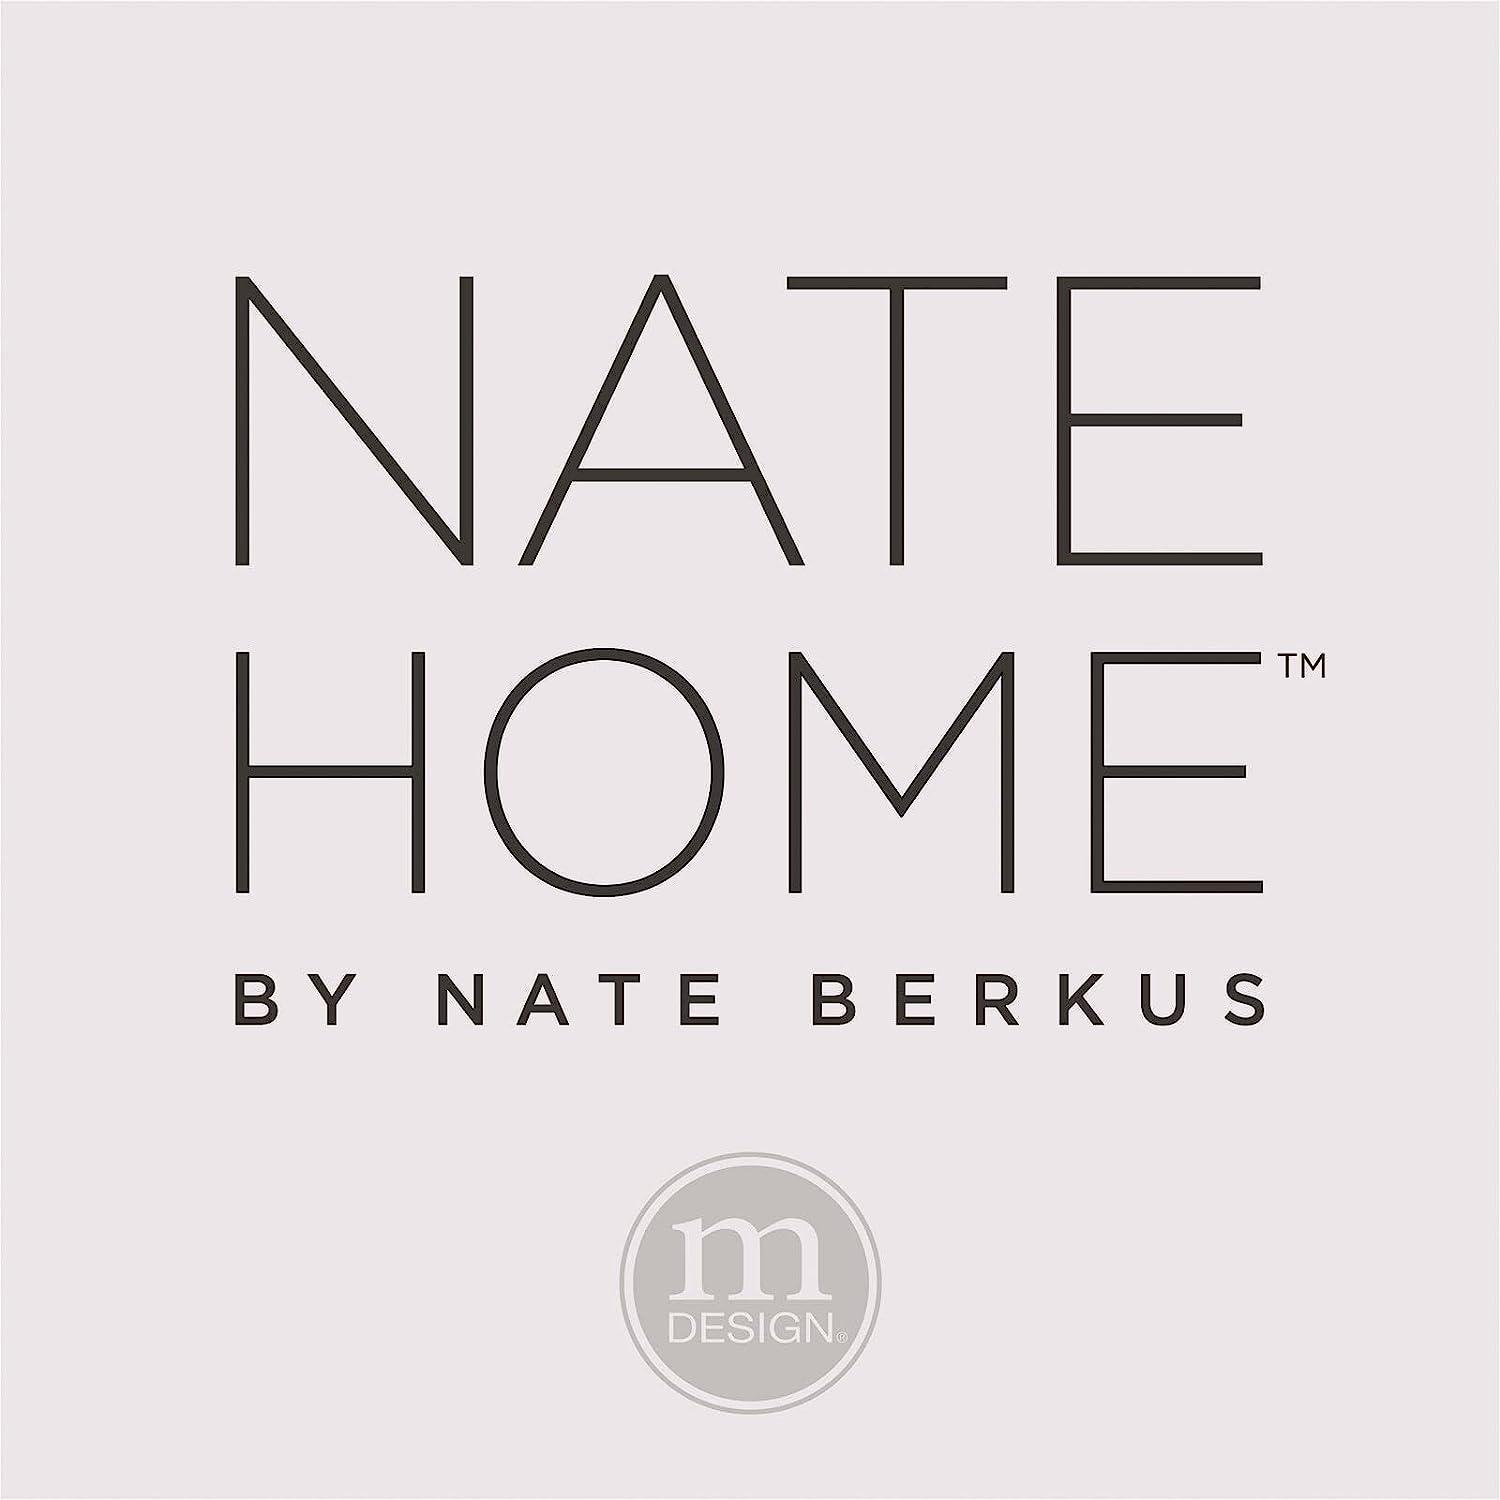 Nate Home by Nate Berkus Cotton Terry 6-Piece Towel Set - Fossil/Beige